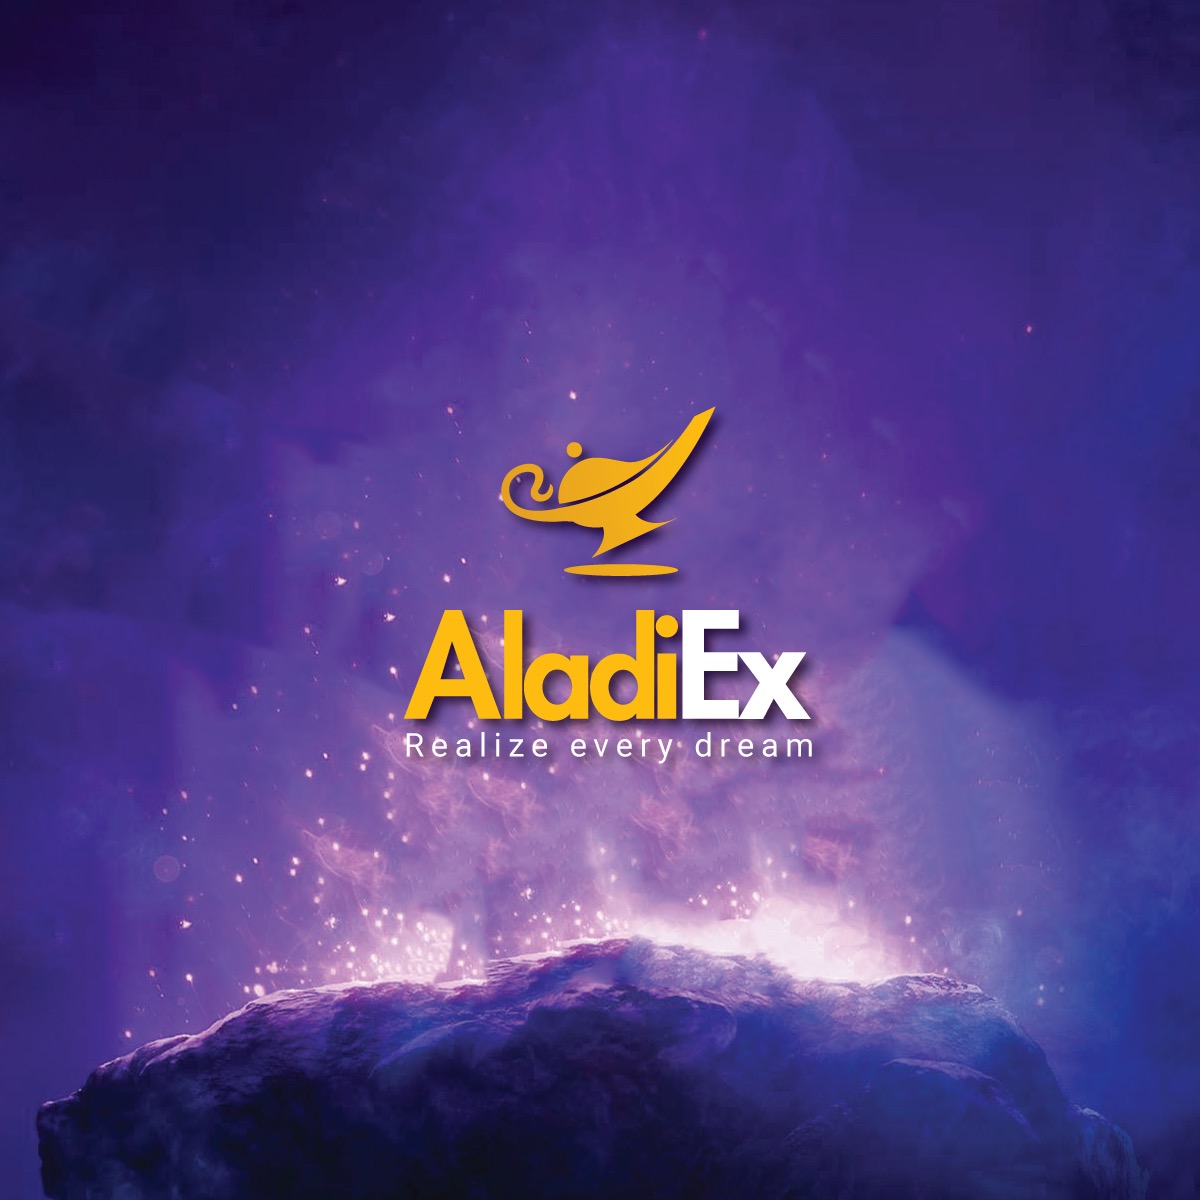 Aladiex Group Limited , Tuesday, May 5, 2020, Press release picture